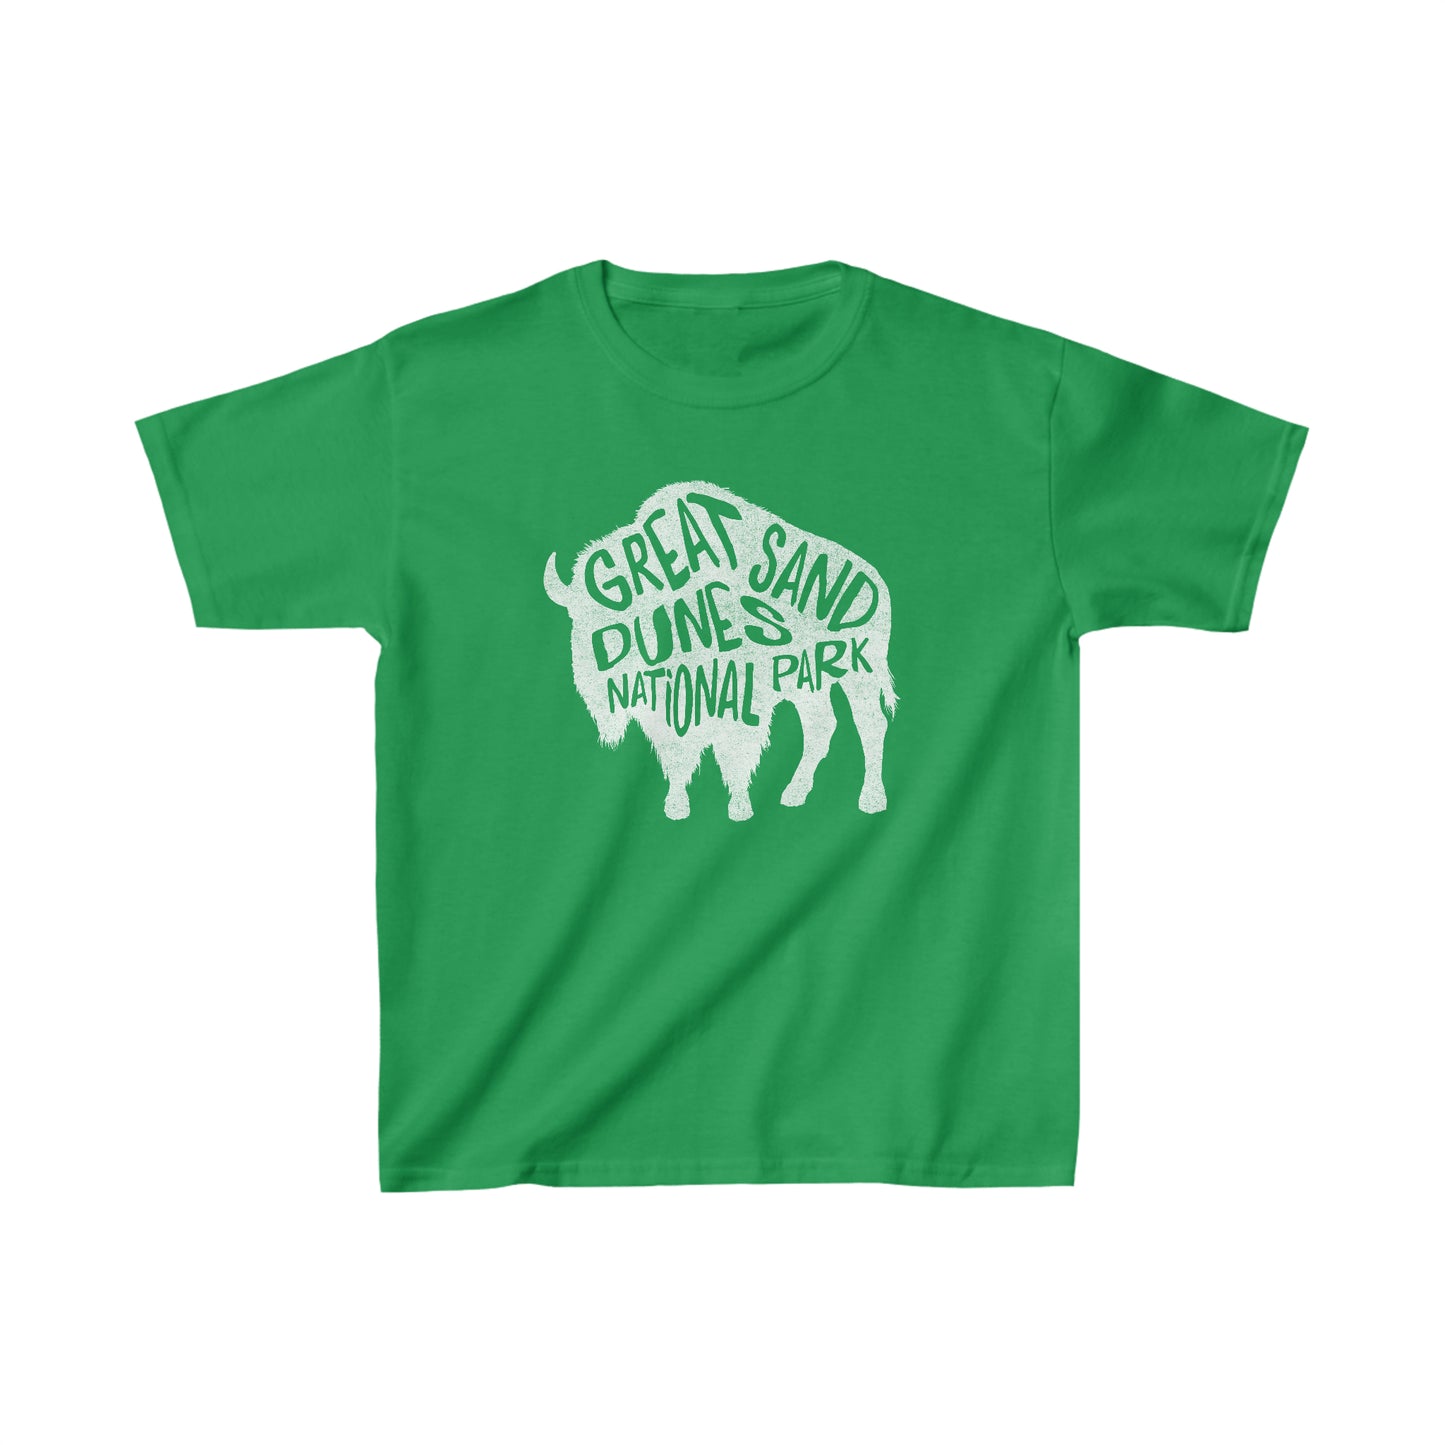 Great Sand Dunes National Park Child T-Shirt - Bison Chunky Text